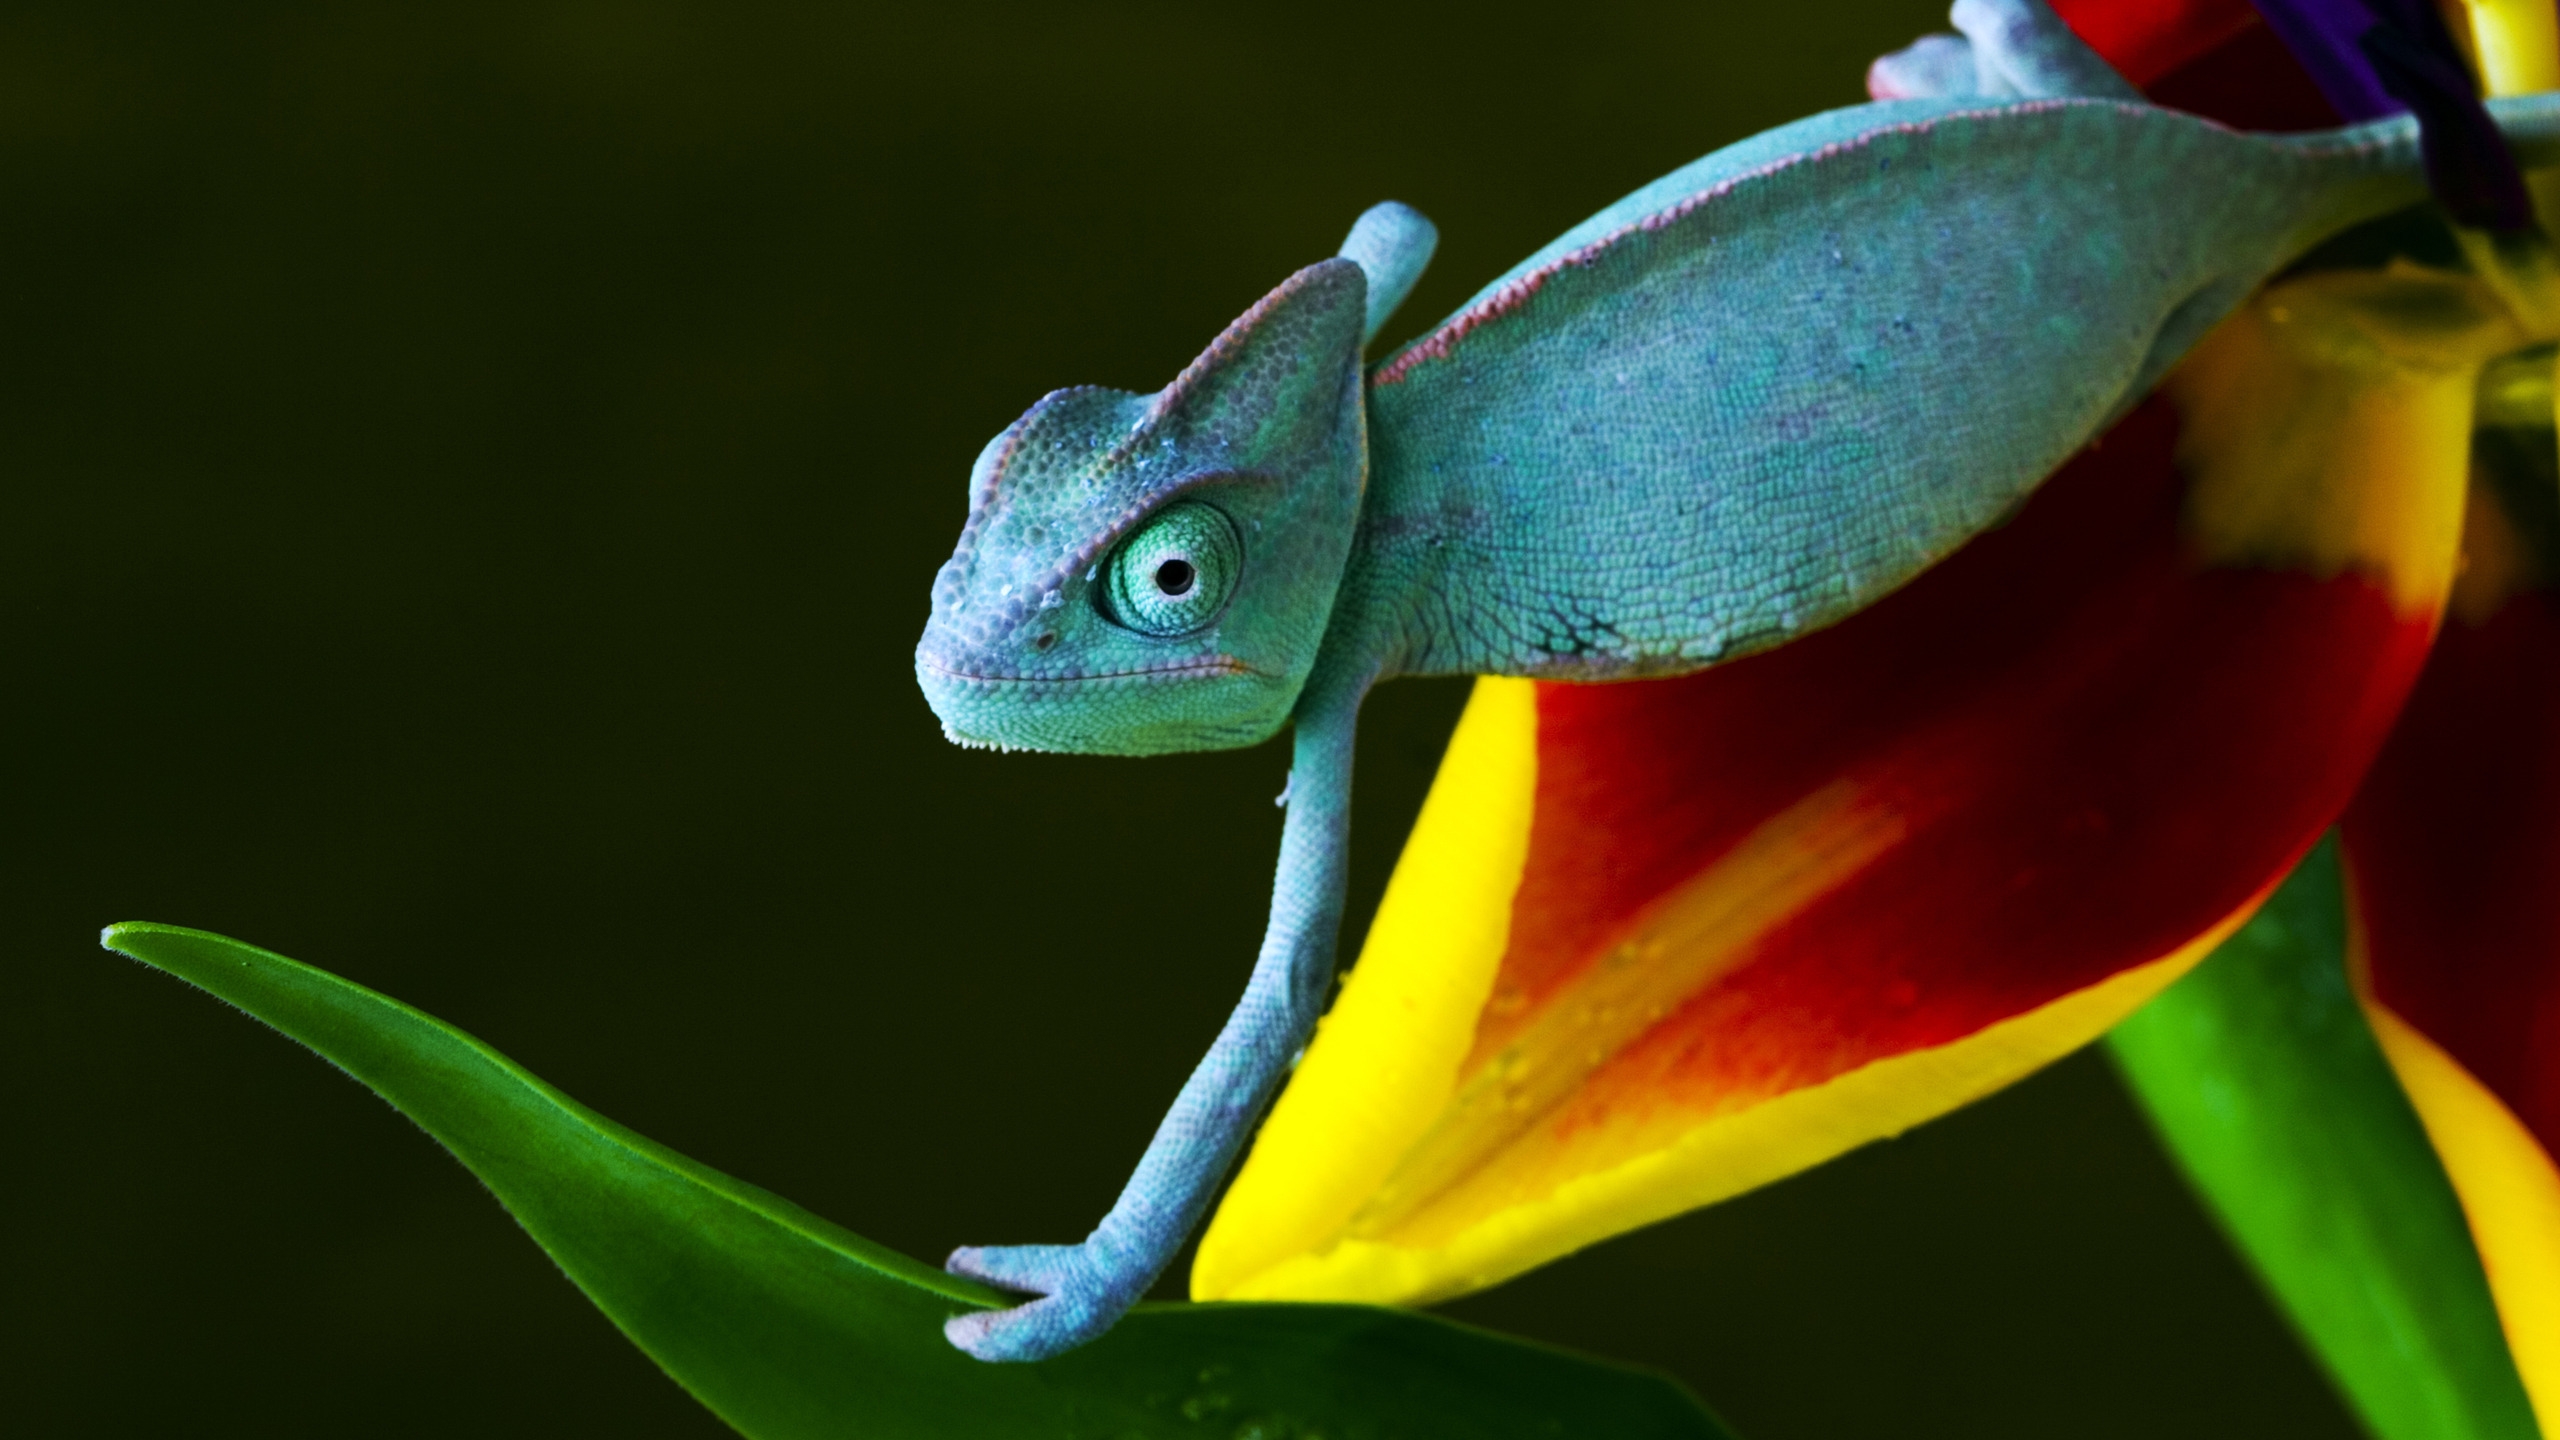 Baby Reptile for 2560x1440 HDTV resolution